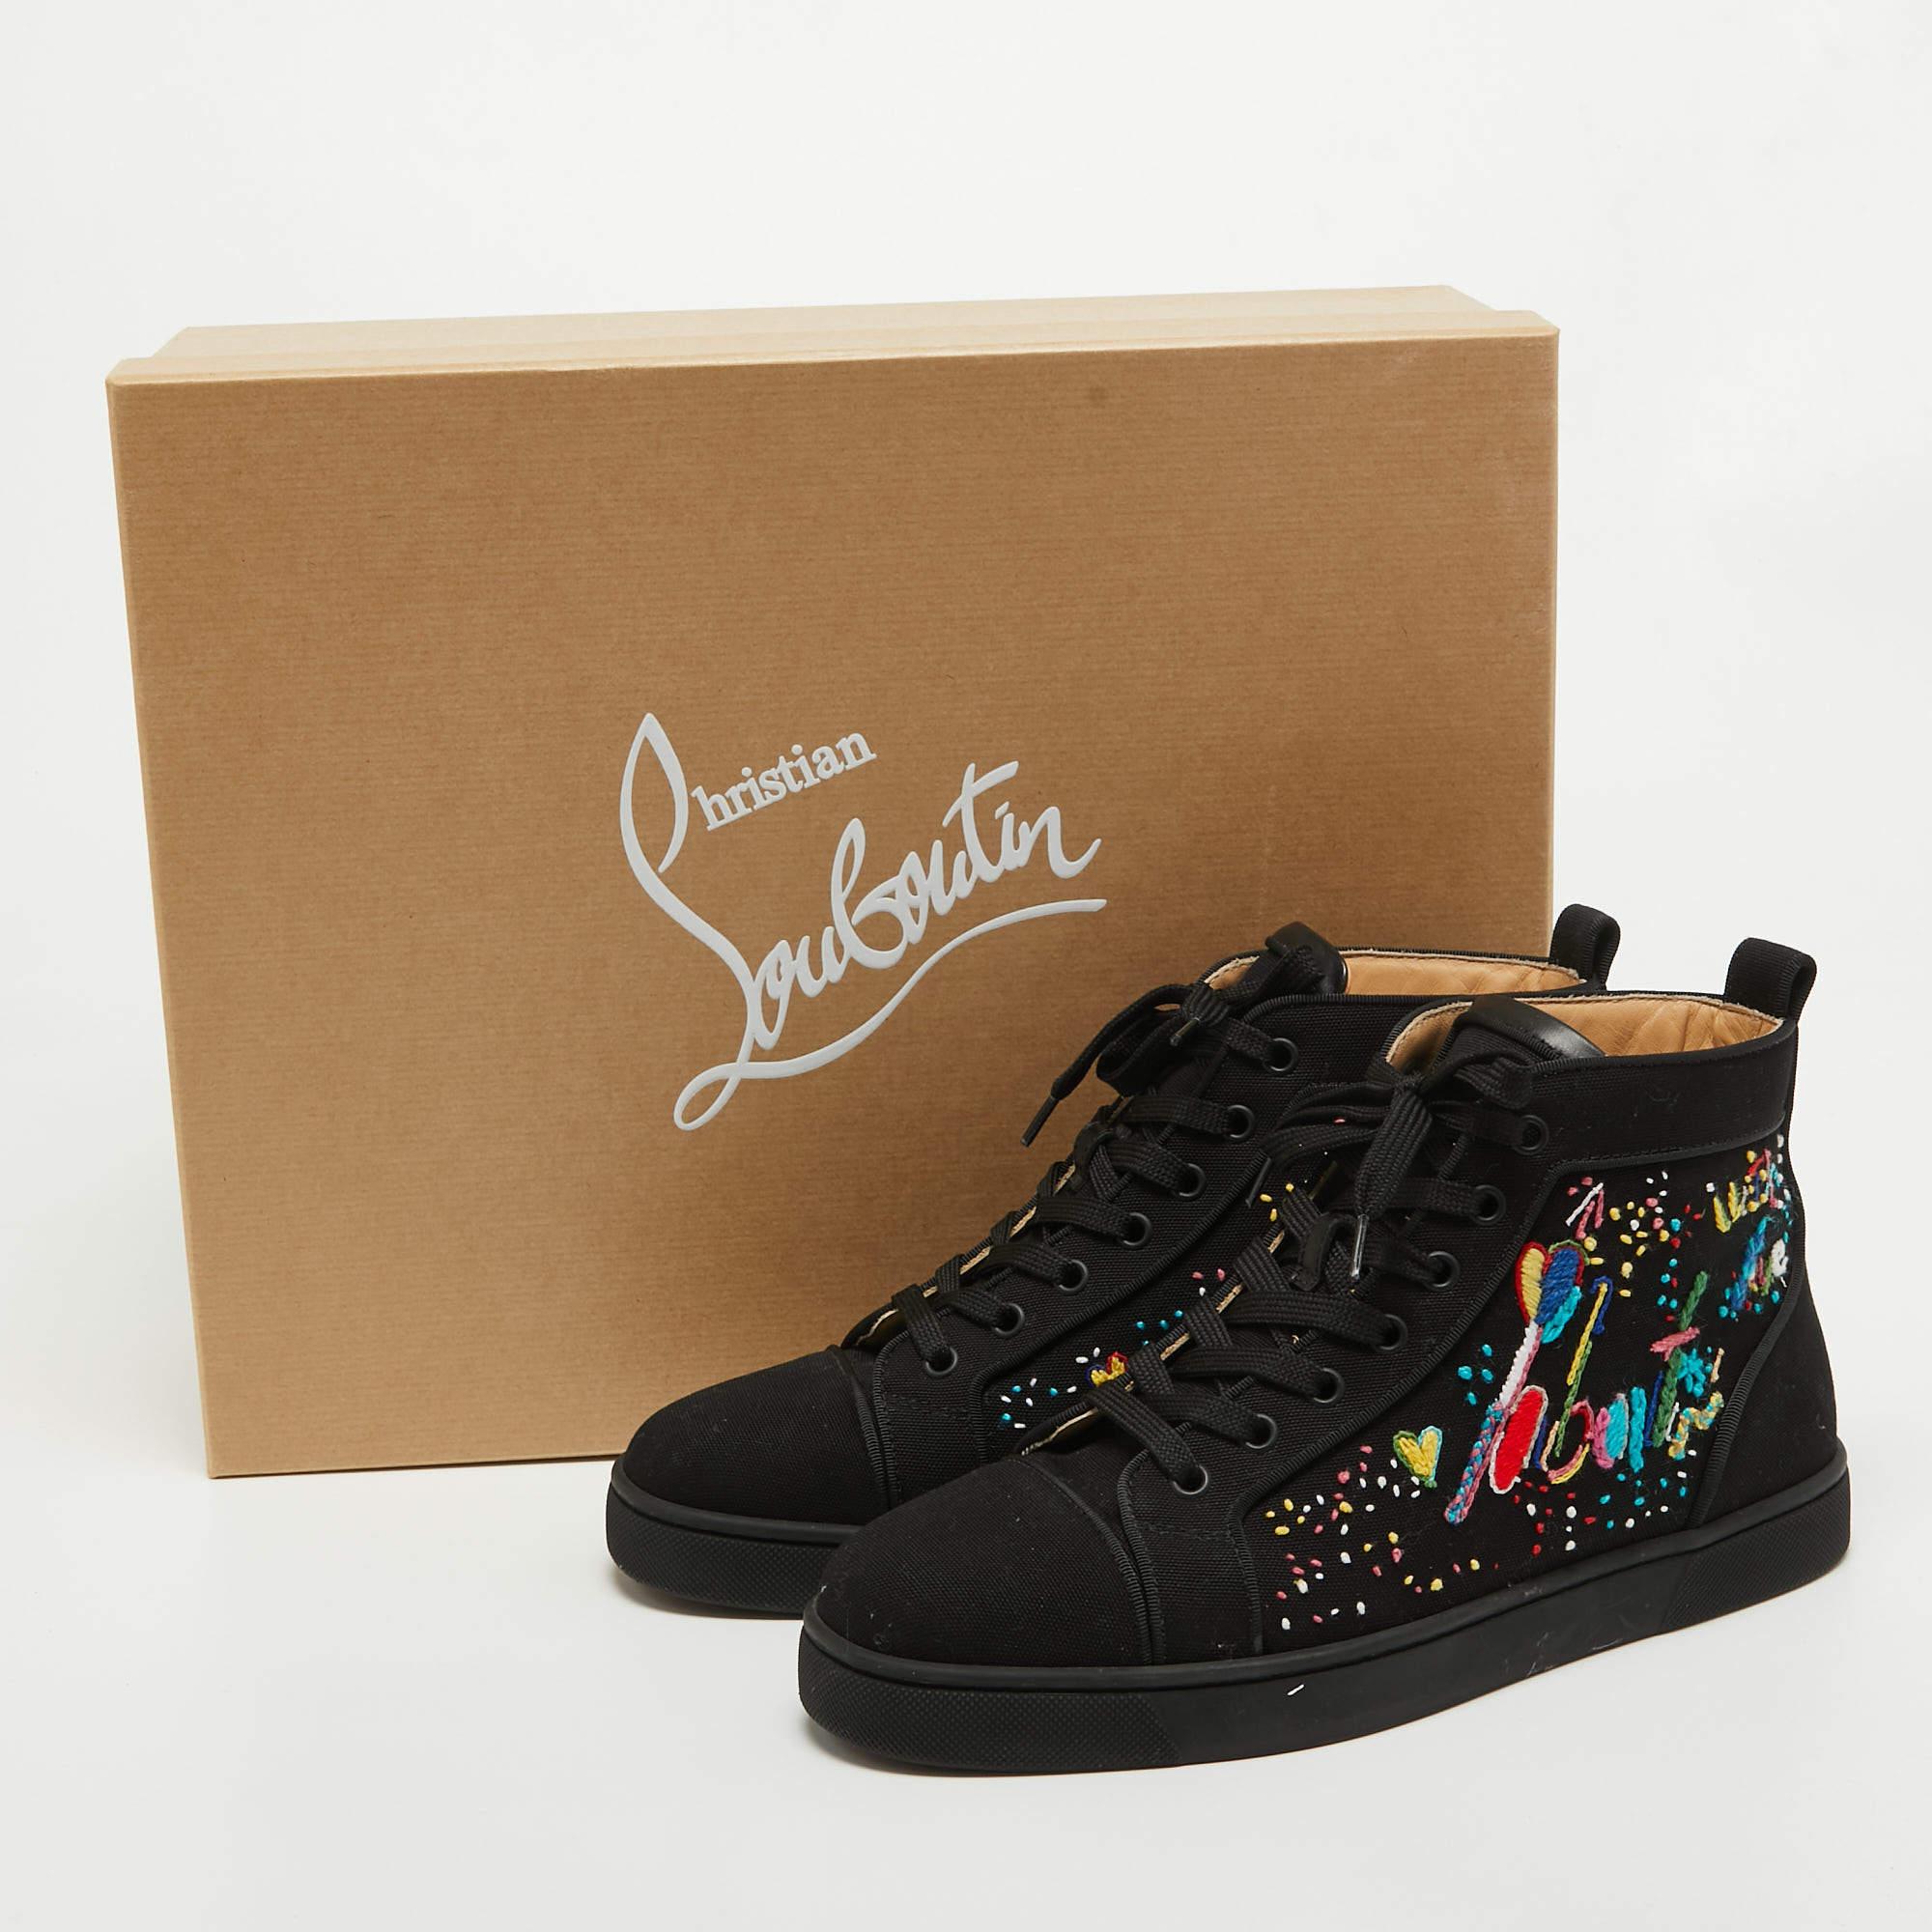 Christian Louboutin Black Canvas Embroidered Louis Orlato Sneakers Size 40 1